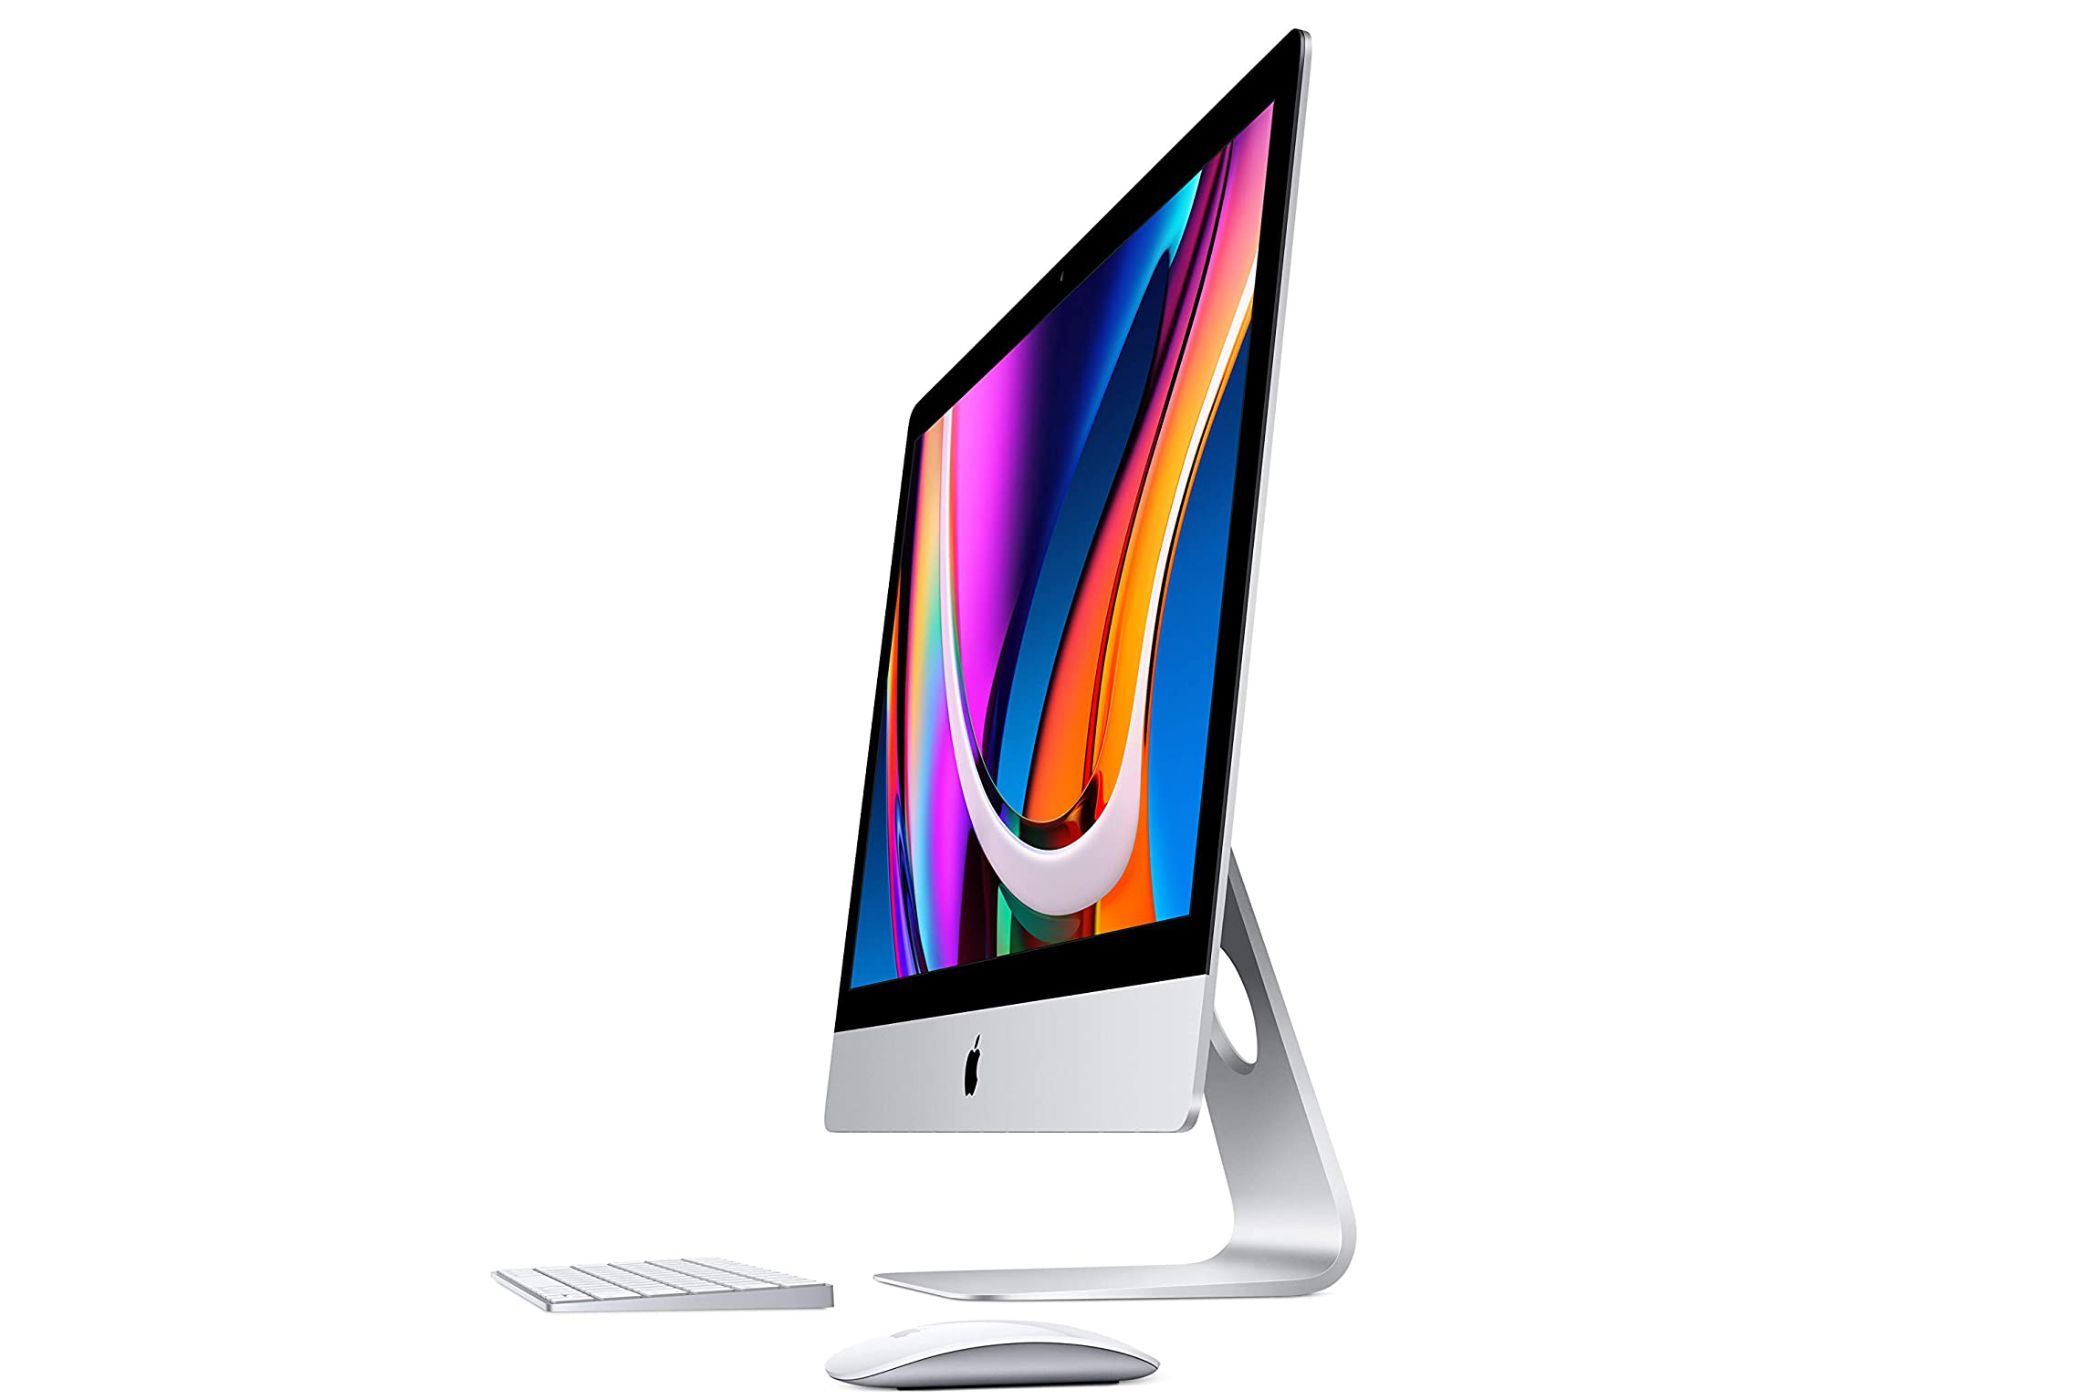 New 27-inch iMac With 5K Retina Display Review 2020